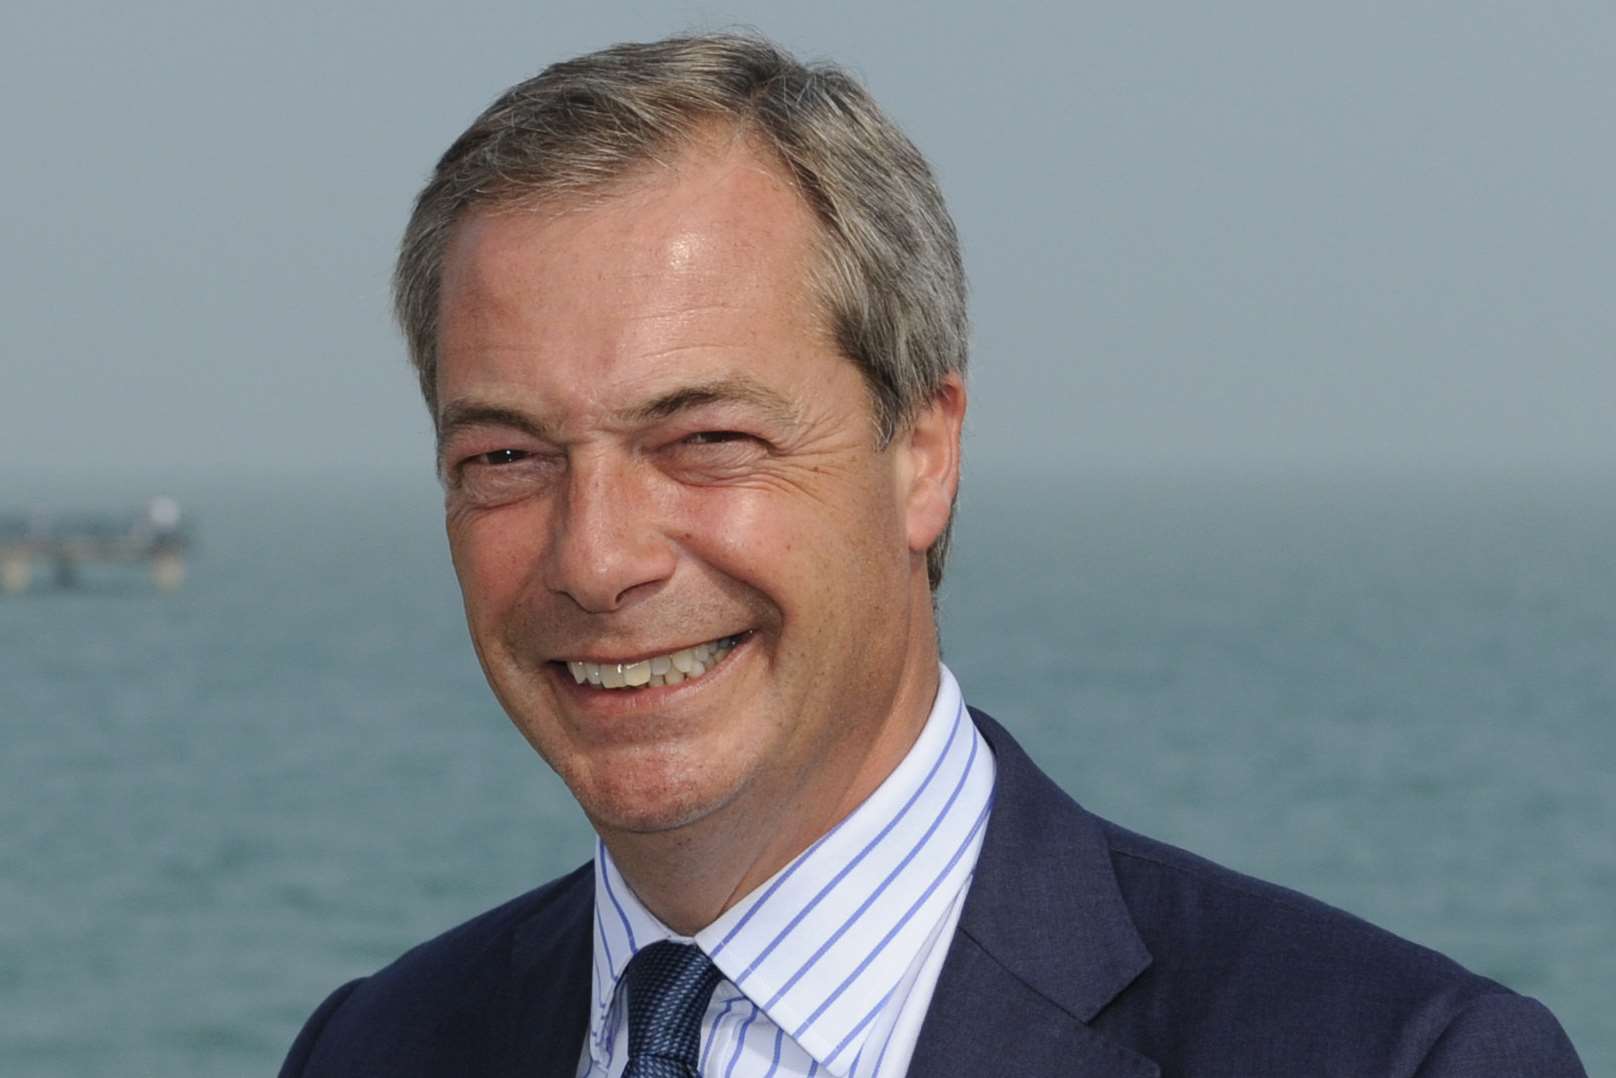 The former UKIP leader has confirmed he won't be standing for the South Thanet seat in June.